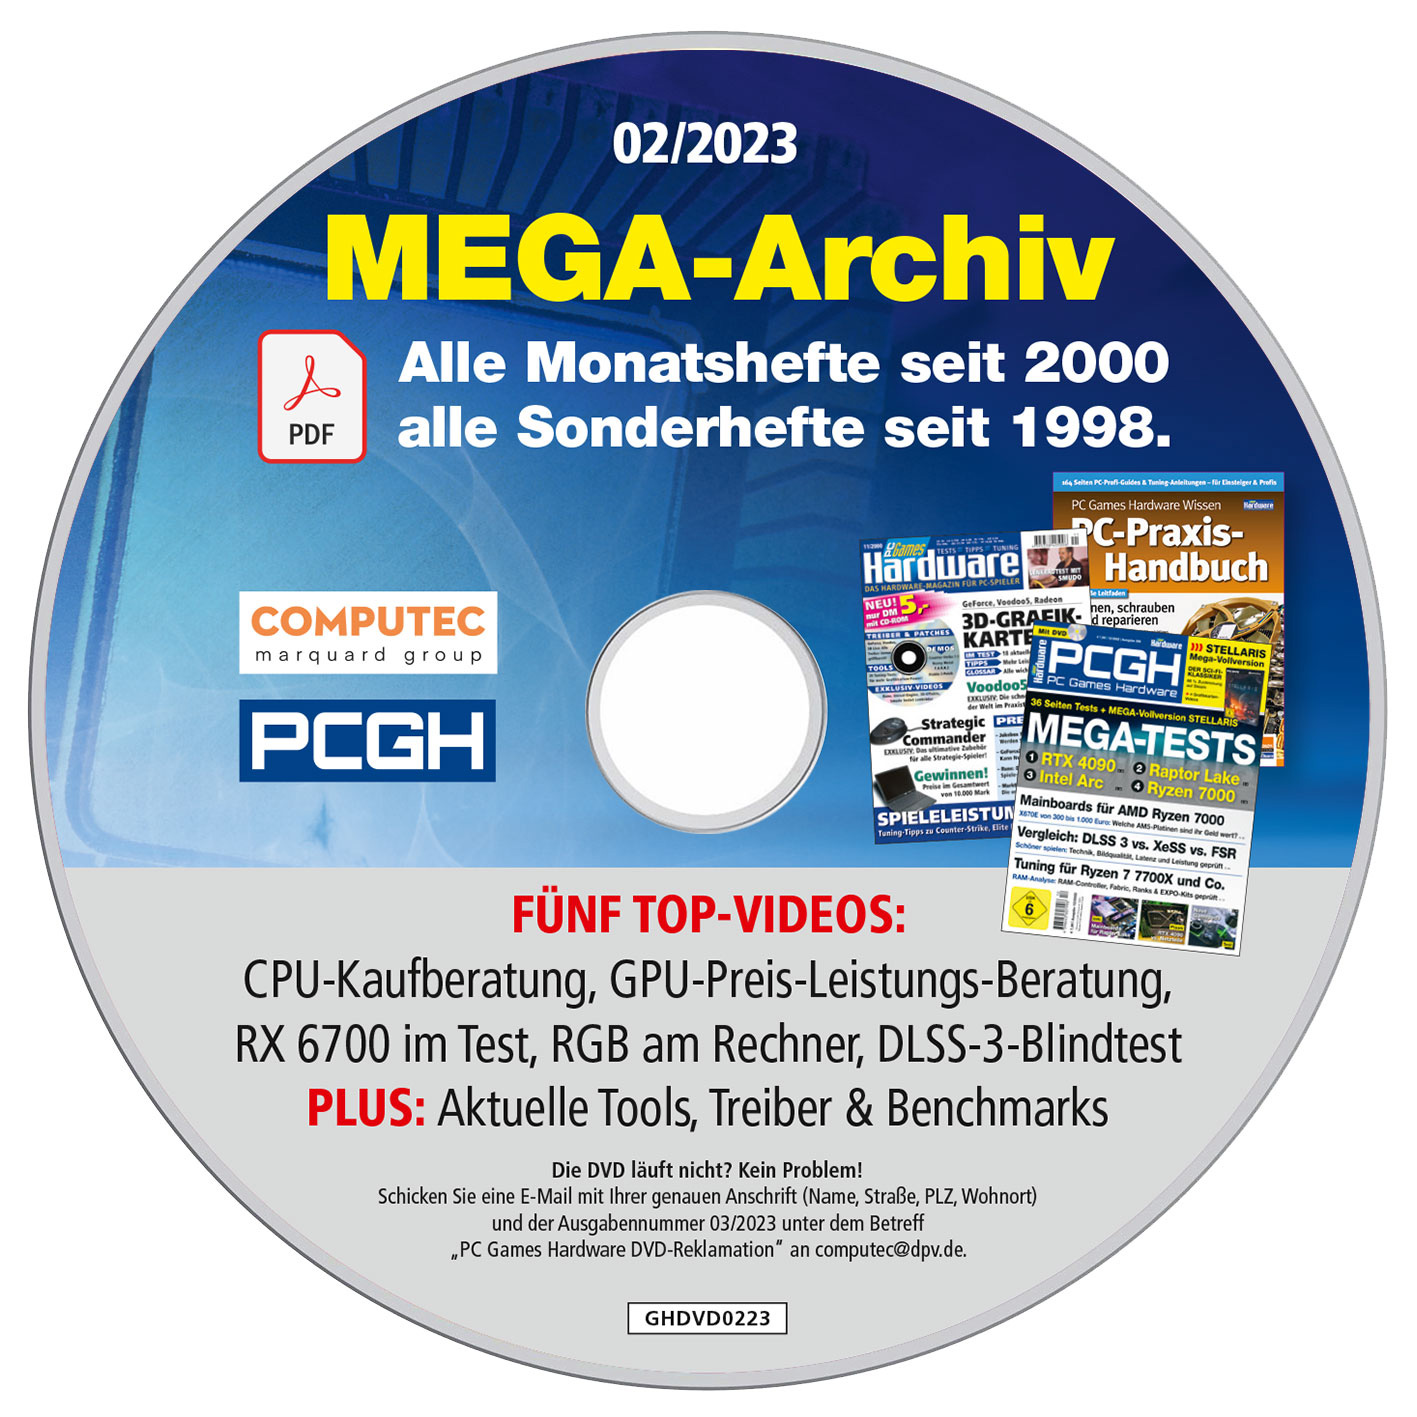 Trial subscription only until December 14th: Three editions of PCGH DVD, mega PDF archive with over 40,000 pages and bonus